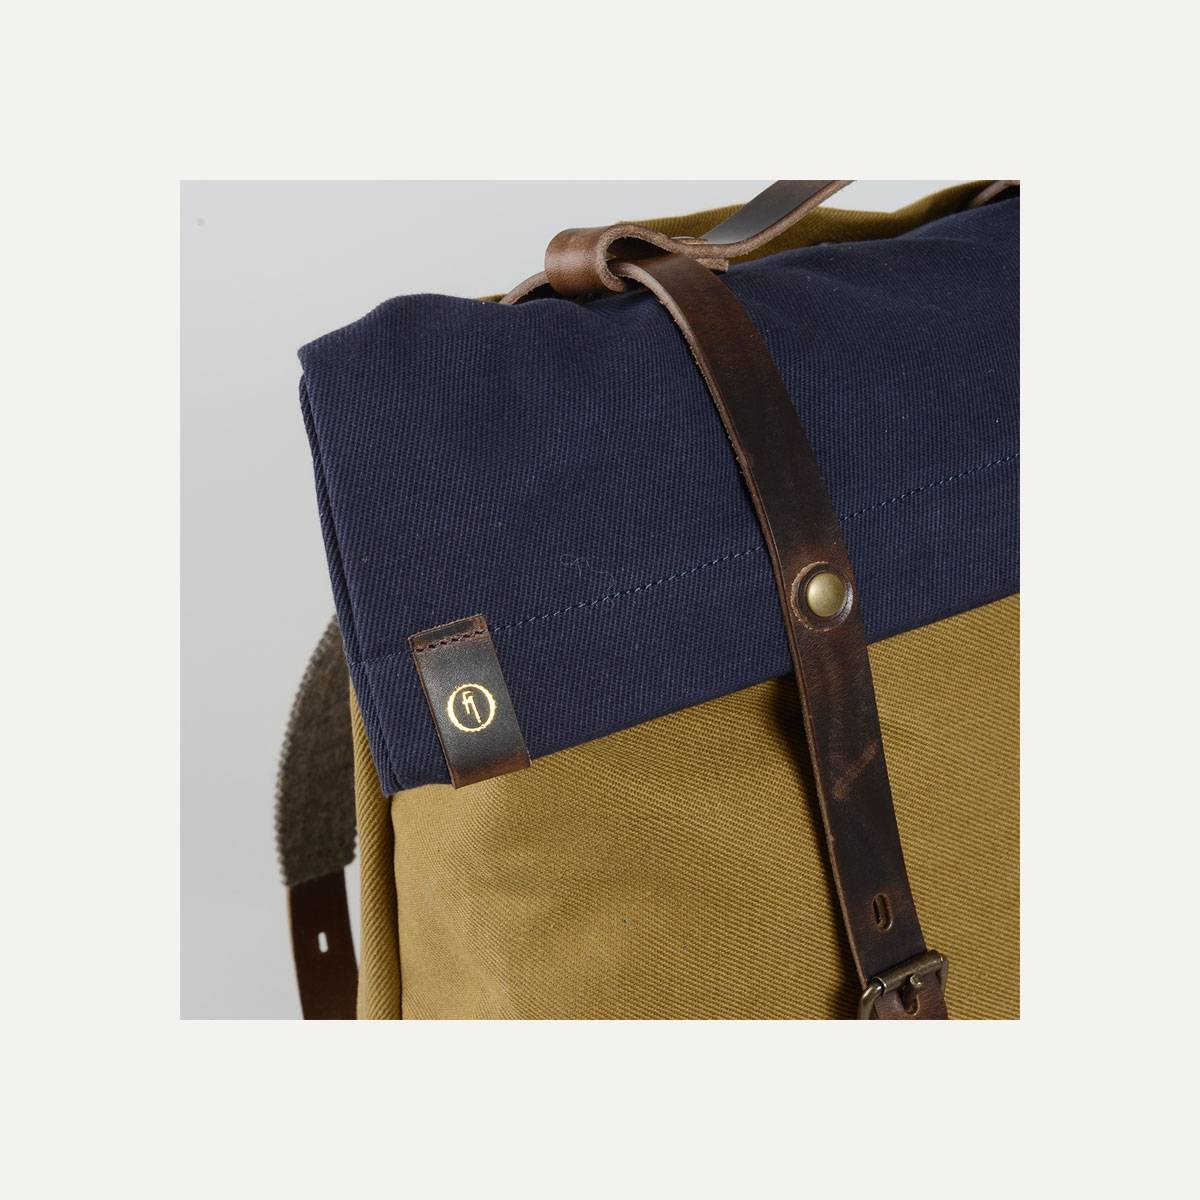 Blitz Motorcycles Scout Backpack - Navy/Camel (image n°10)